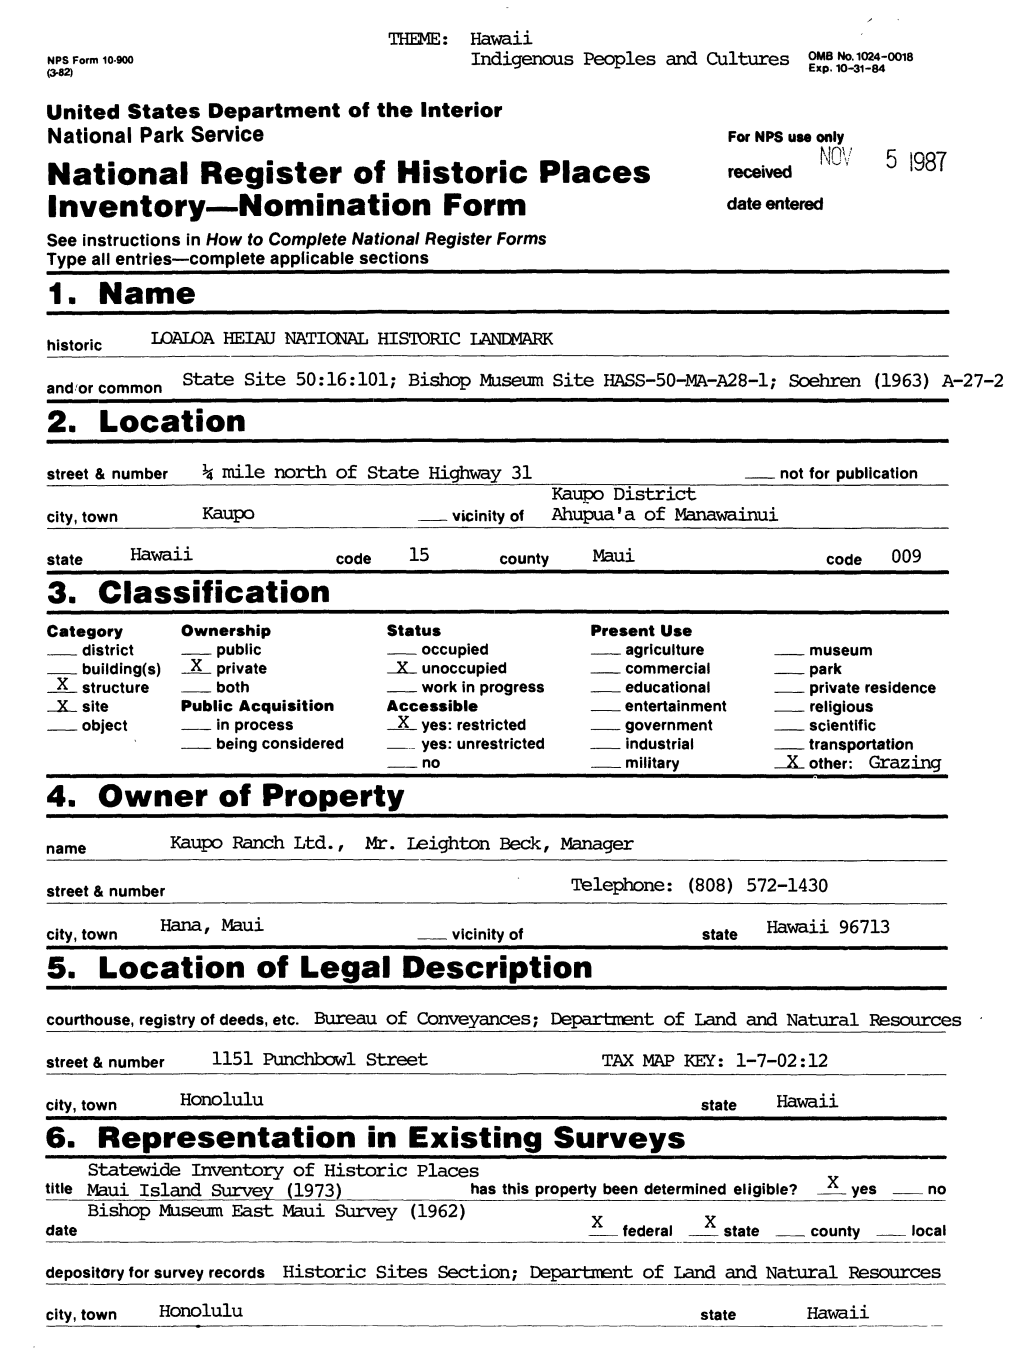 98T Inventory Nomination Form Date Entered See Instructions in How to Complete National Register Forms Type All Entries Complete Applicable Sections______1